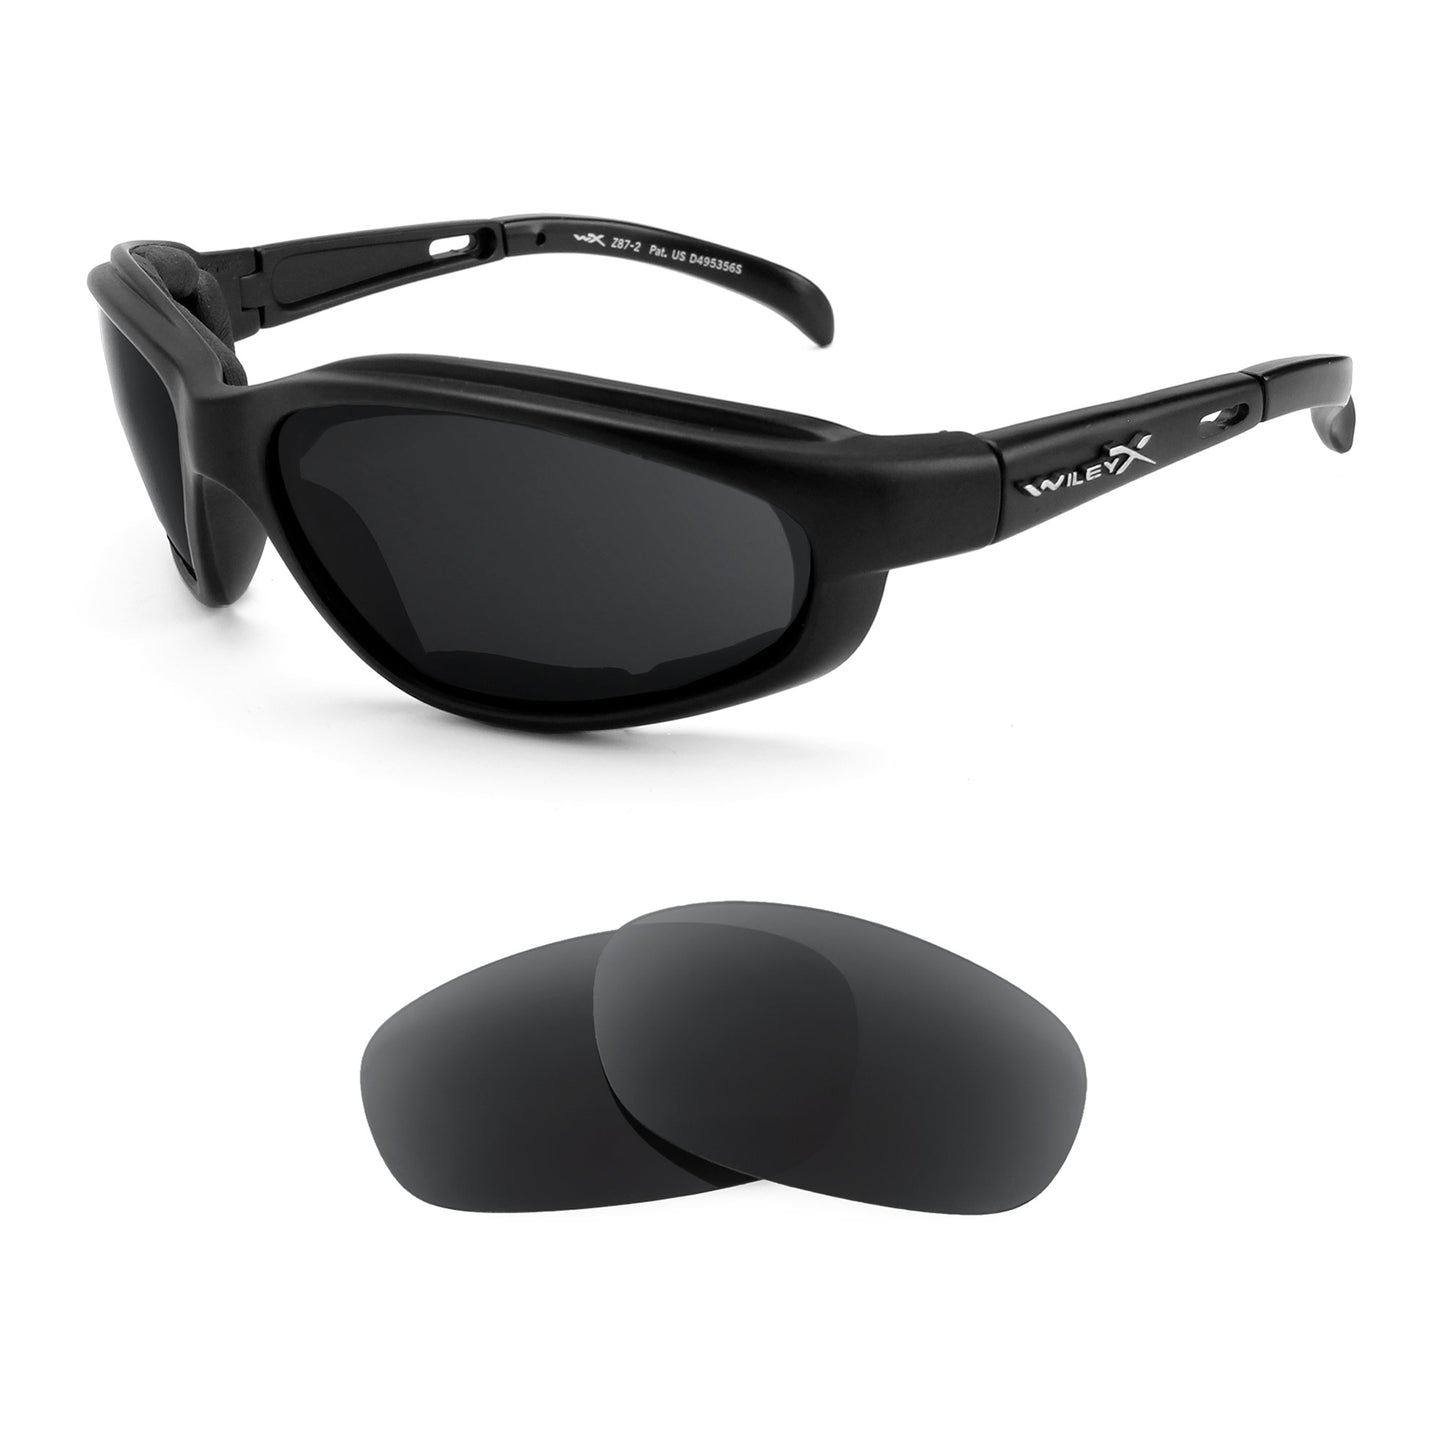 Wiley X XL-1 sunglasses with replacement lenses